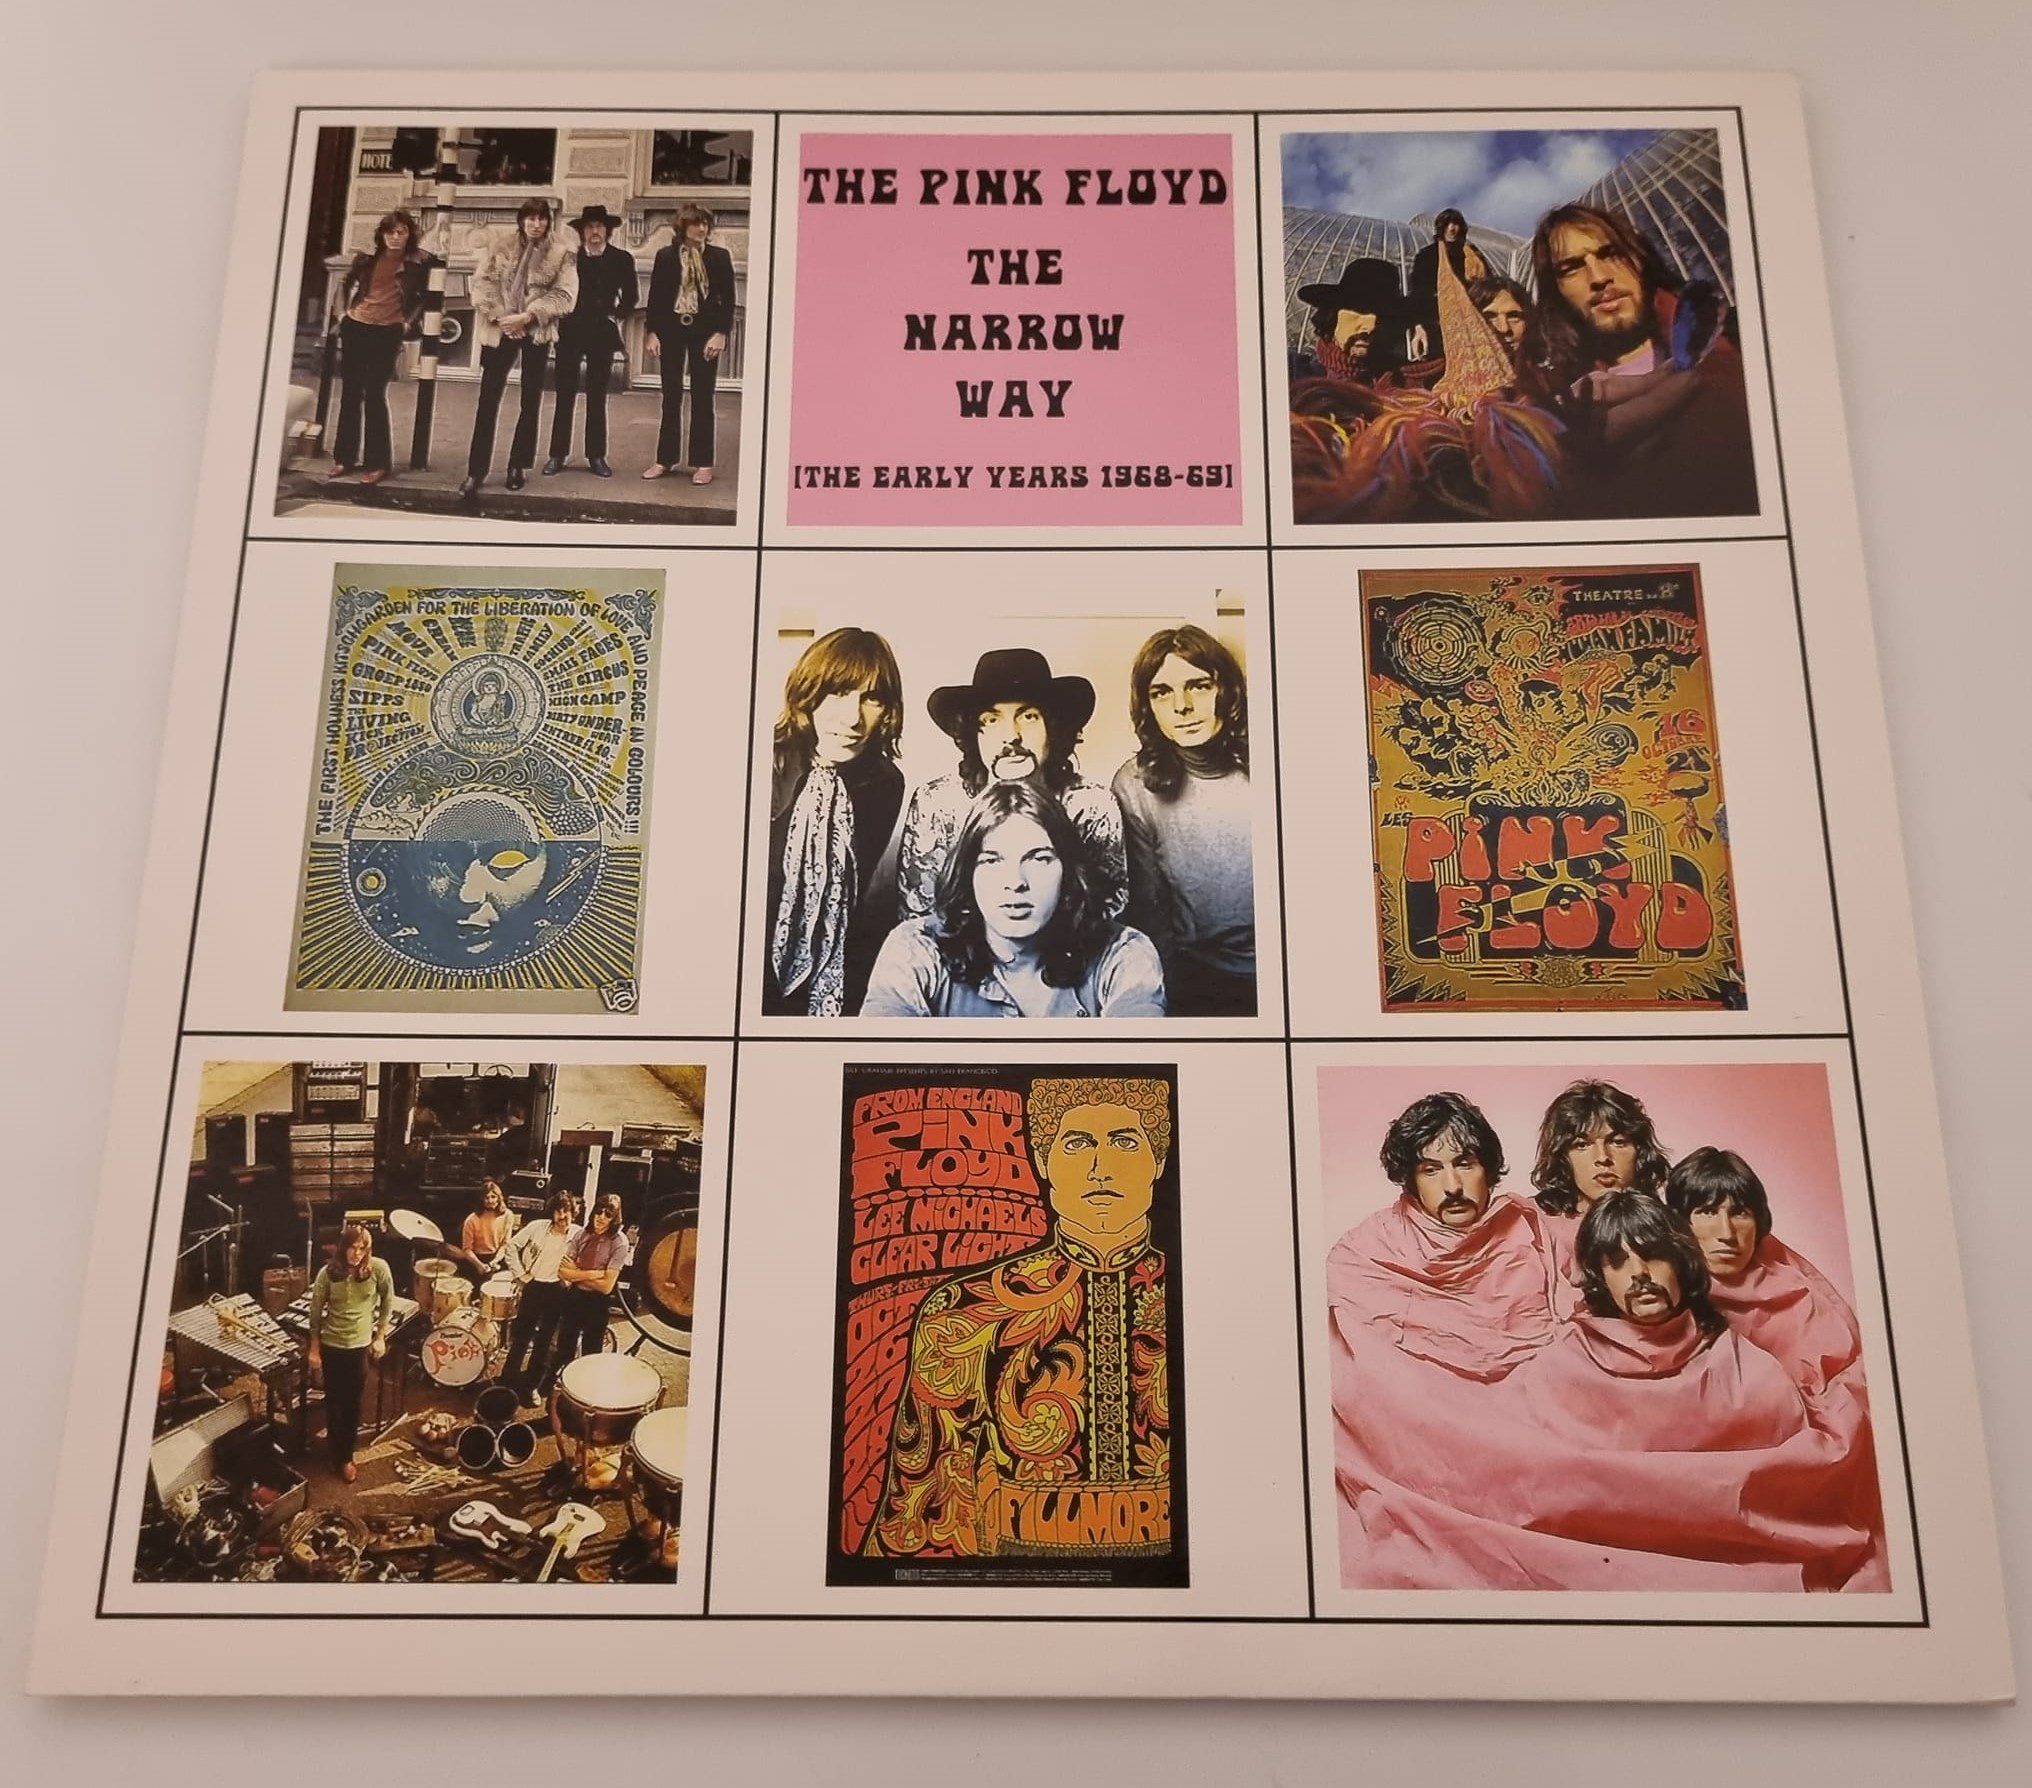 Pink Floyd – The Narrow Way (Early Years 1968/1969) LP - Rock Revival